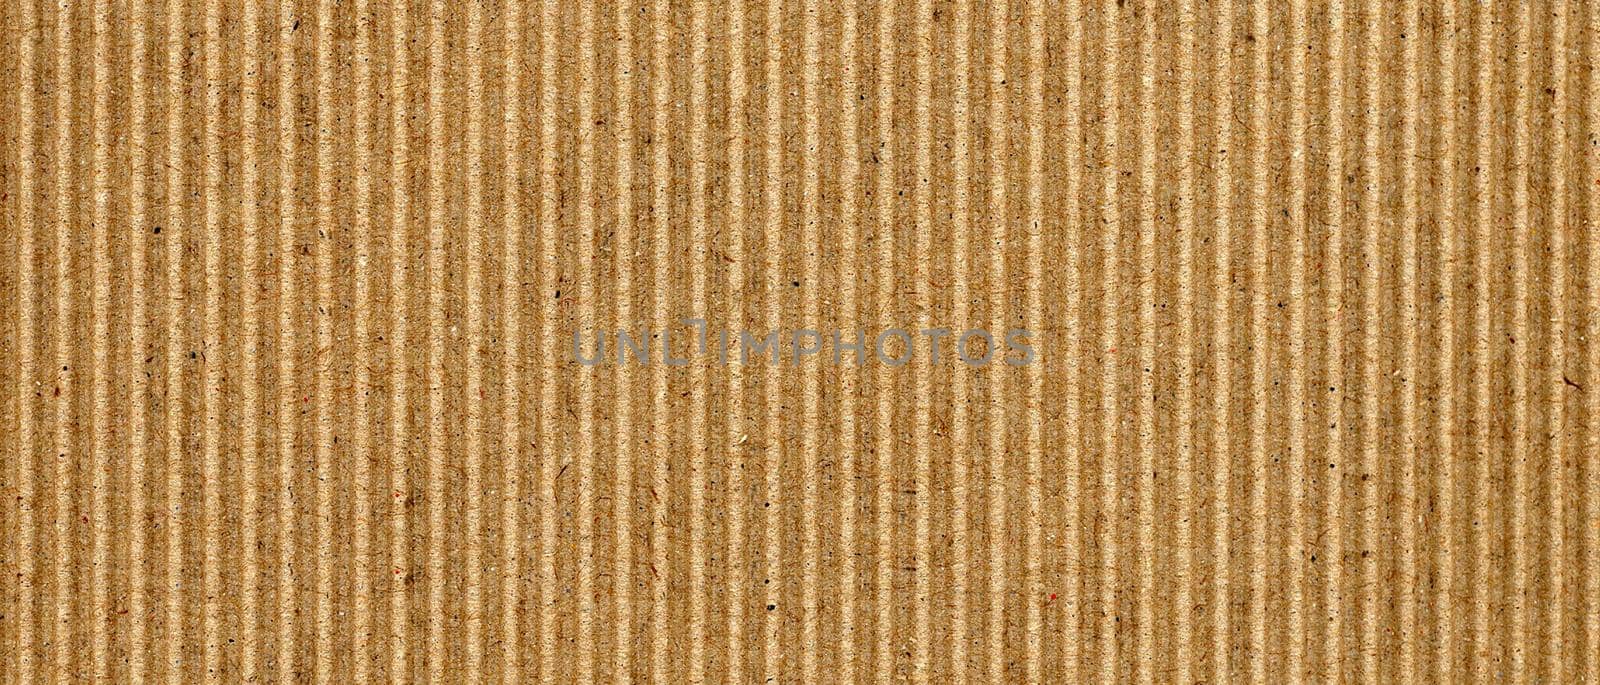 wide brown corrugated cardboard texture useful as a background